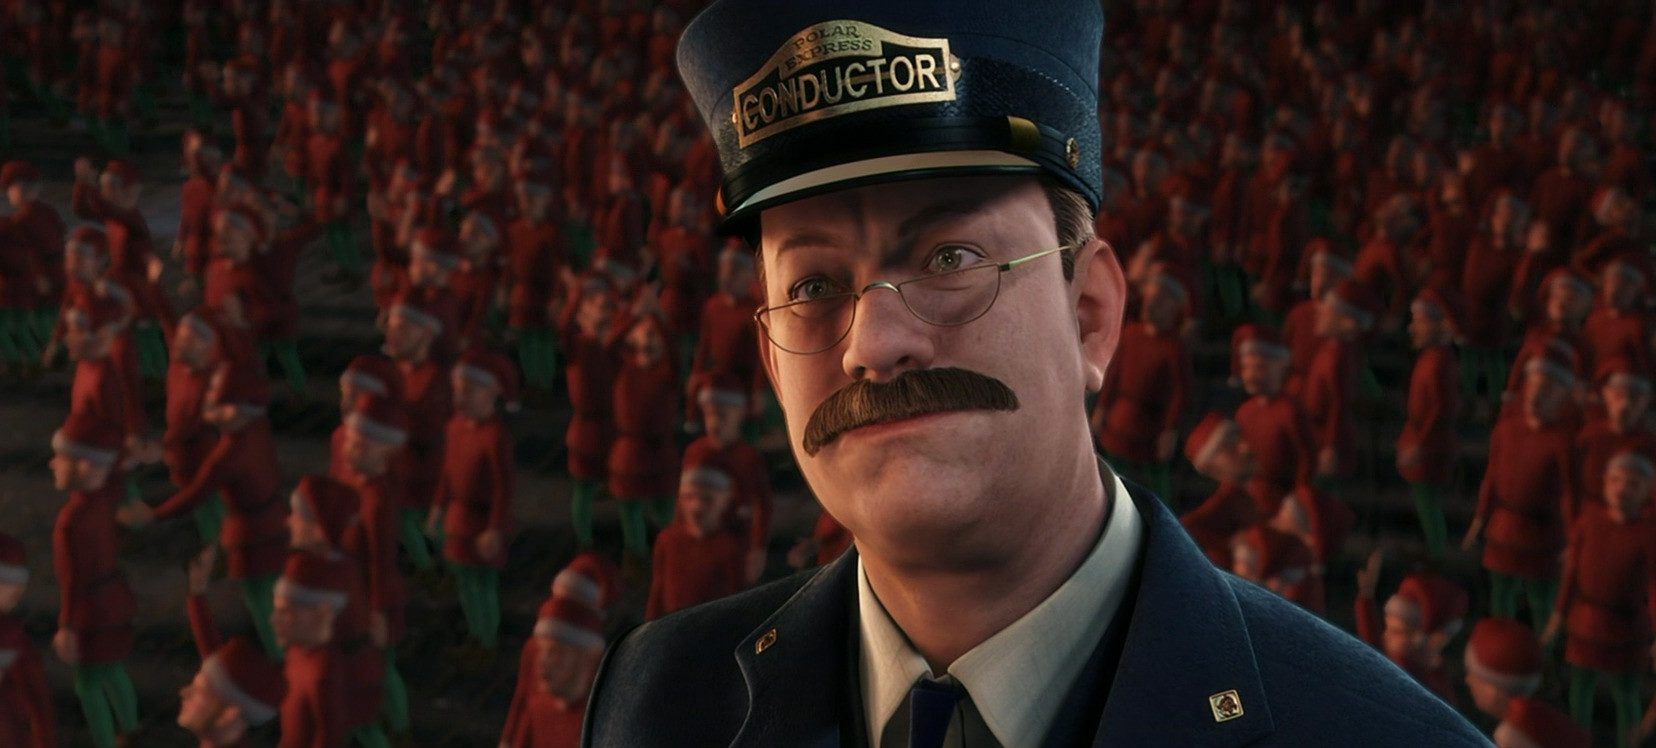 Polar Express': Interesting and Unique Things You Never Saw